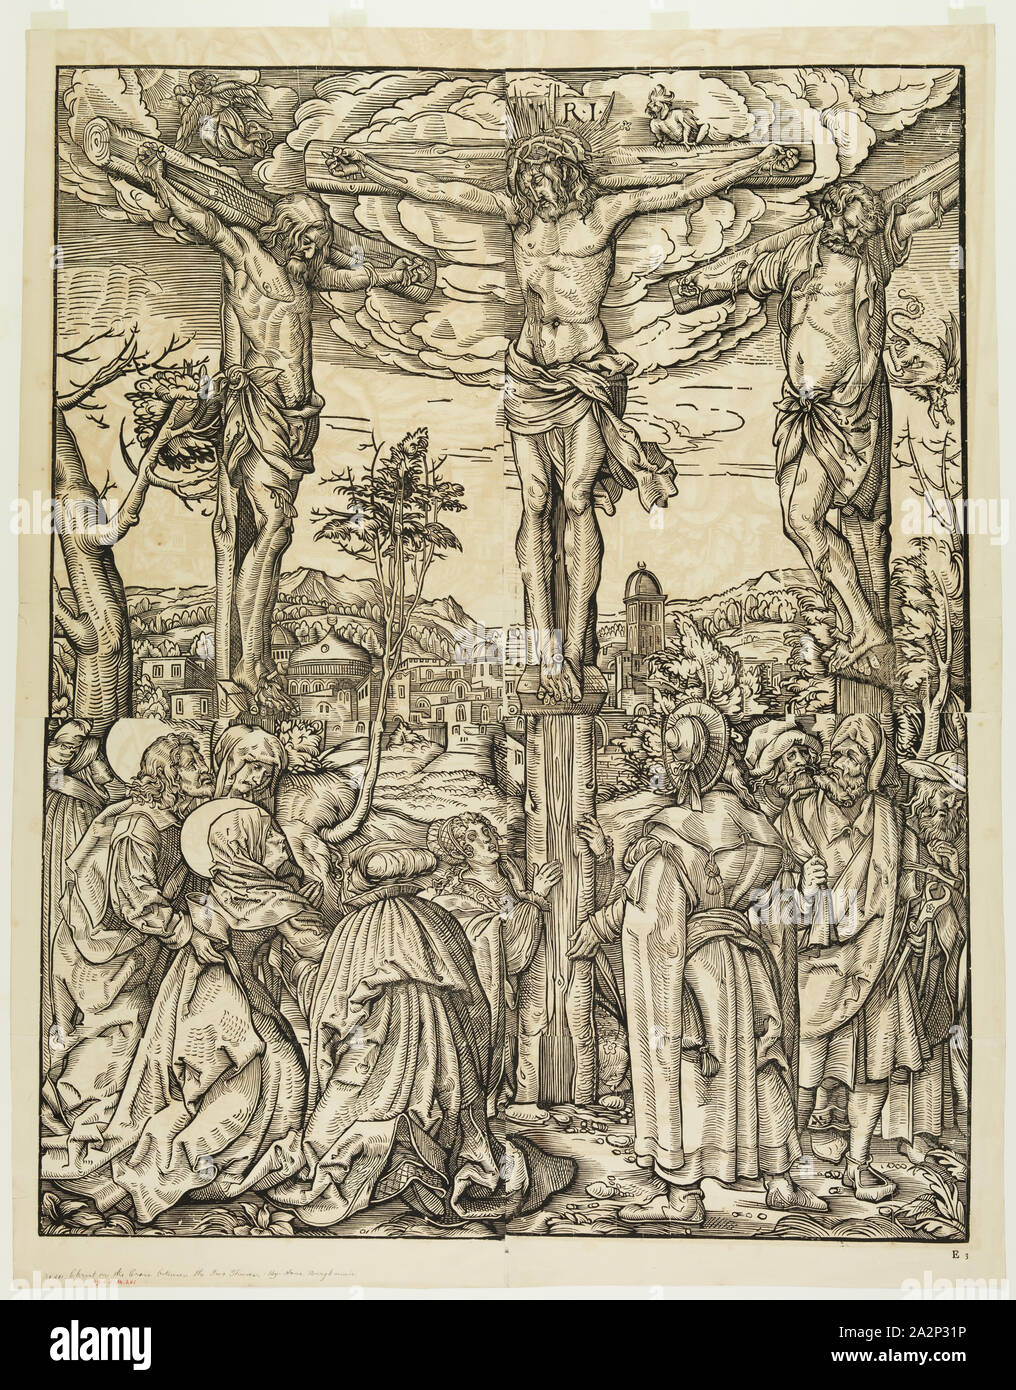 after Hans Burgkmair, German, 1473-1531, Christ on the Cross Between Two Thieves, 19th century, woodcut printed from eight blocks in black ink on wove paper, Image: 33 × 26 1/4 inches (83.8 × 66.7 cm Stock Photo